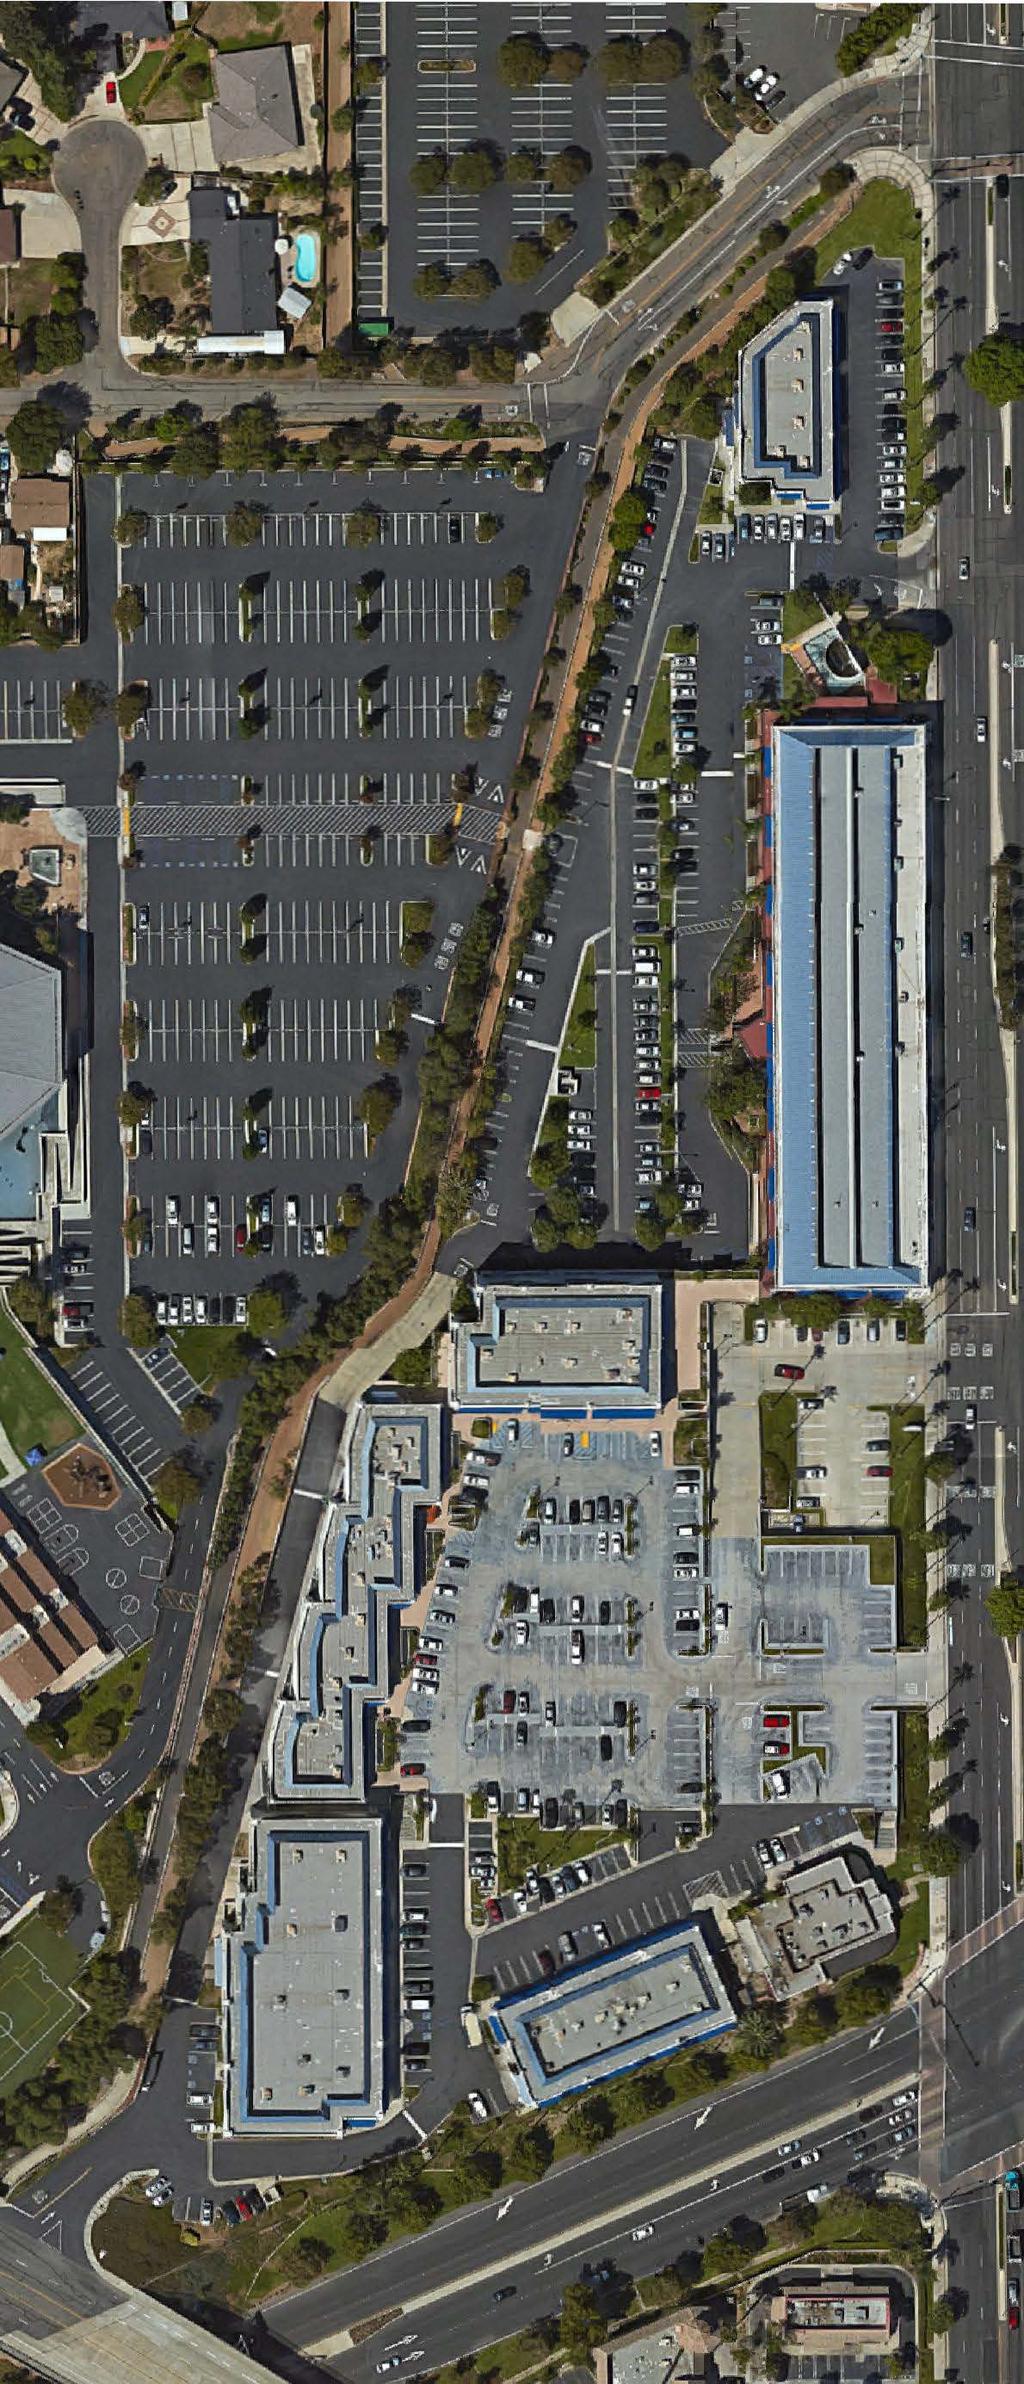 BUILDING B CBRE 7 SITE PLAN OVERALL ±25,000 SF (TWO-LEVEL) FORMER GYM SPACE PROPOSED SIGNAL ±1,950 SF ±2,490 SF ±2,505 SF MOUNTAIN VIEW AVENUE 4,315 S.F. EXISTING 18200.